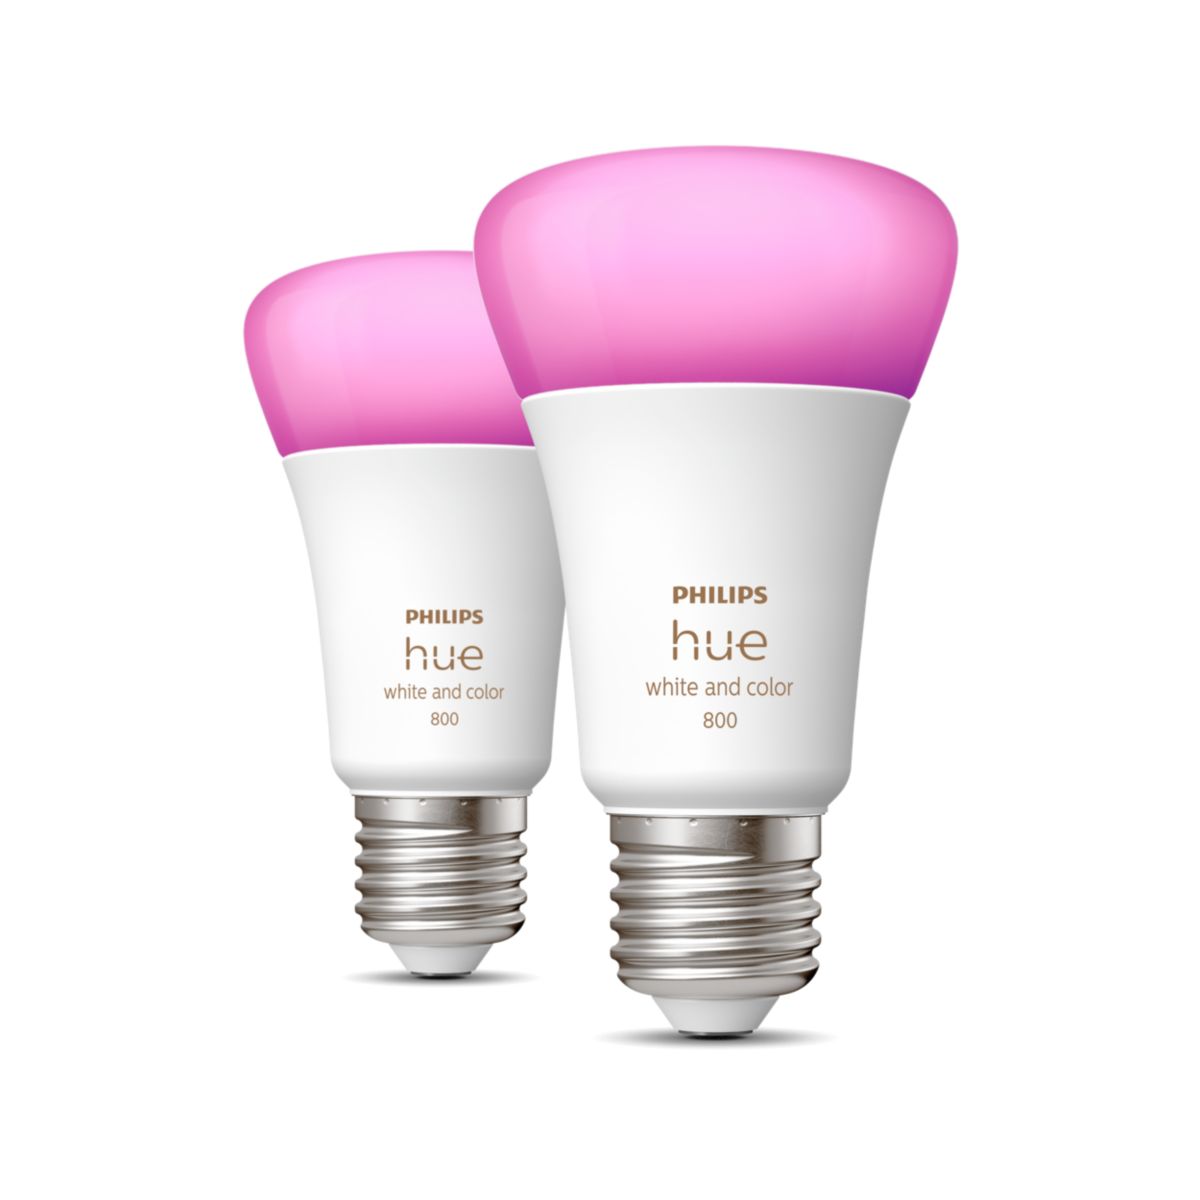 Philips Hue E27 white and color ambiance 800lm 2-pack